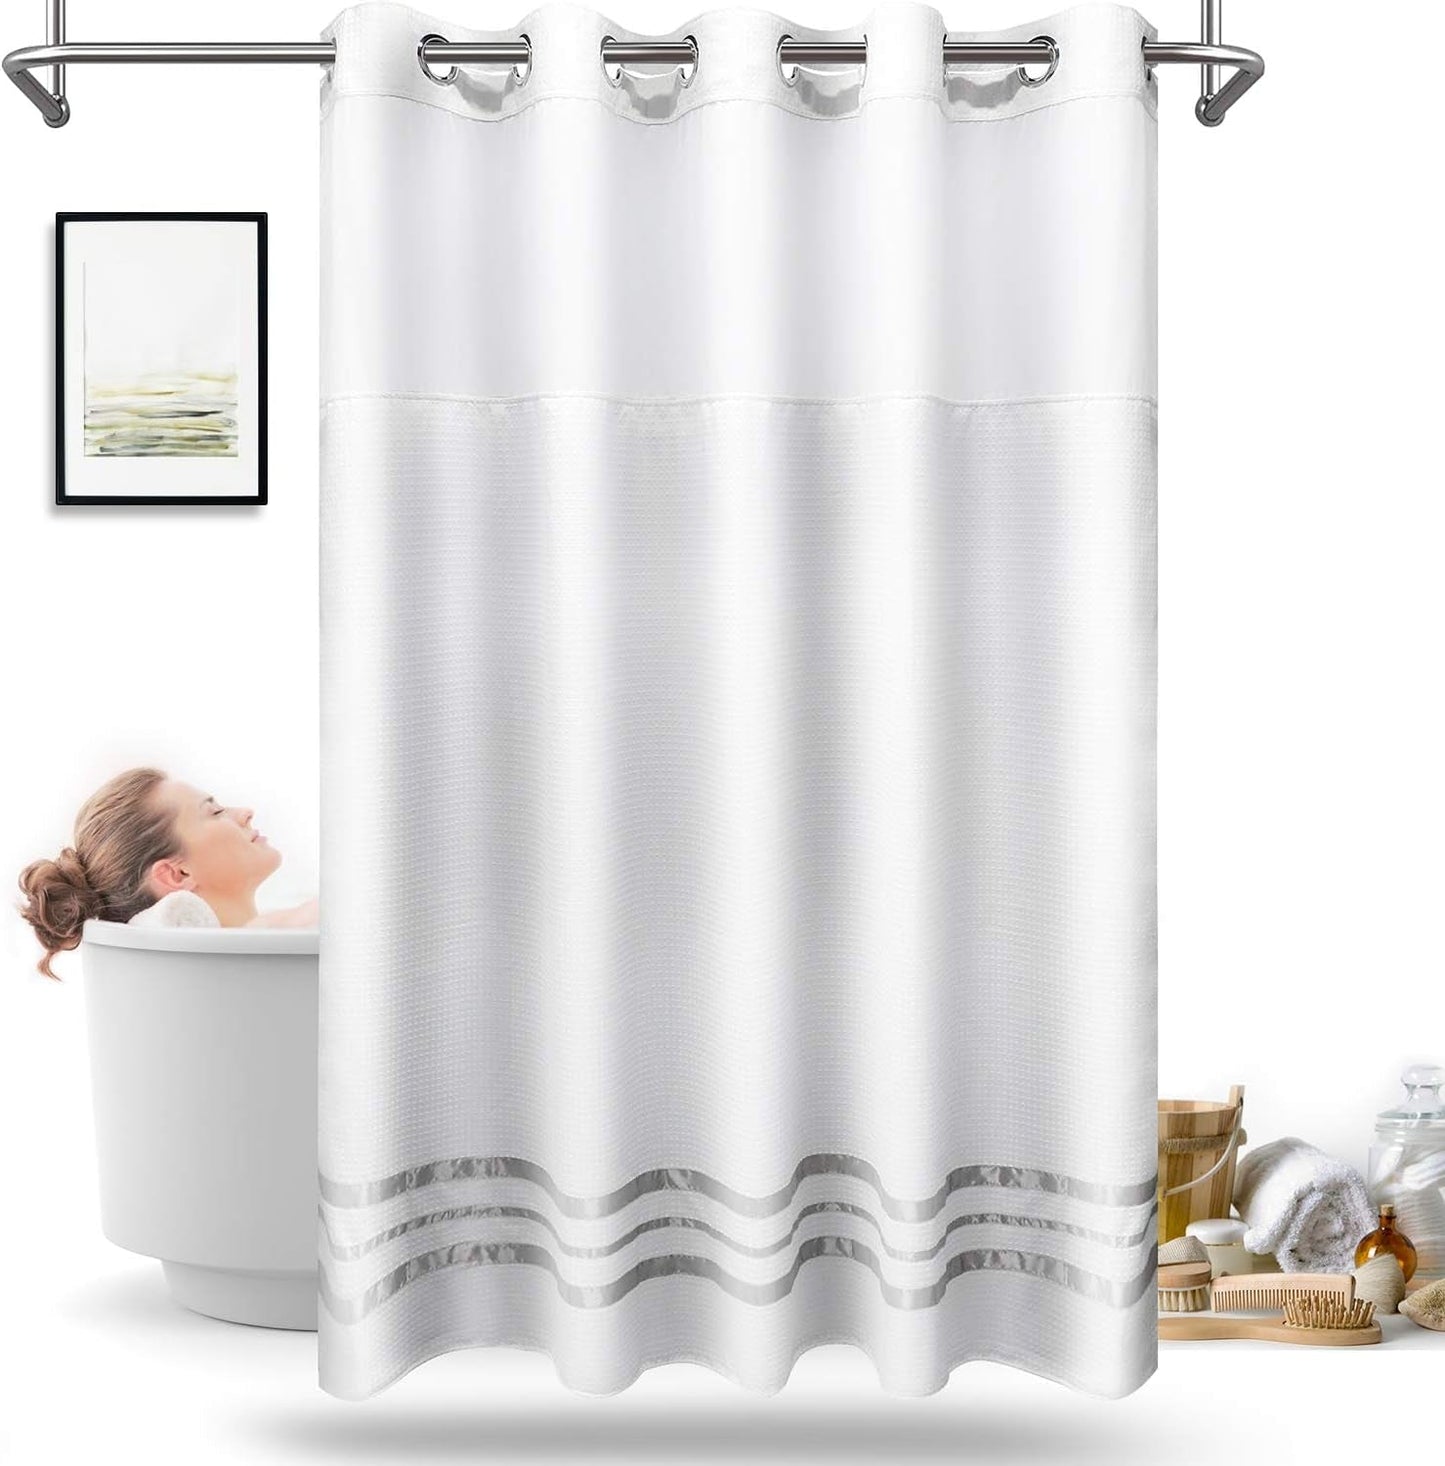 ARICHOMY 2023 Upgraded Shower Curtain Set Waffle Weave Curtain Fabric Shower Curtain Set Hook Free Removeable Liner, 250GSM Machine Washable 71By 74Inch, White